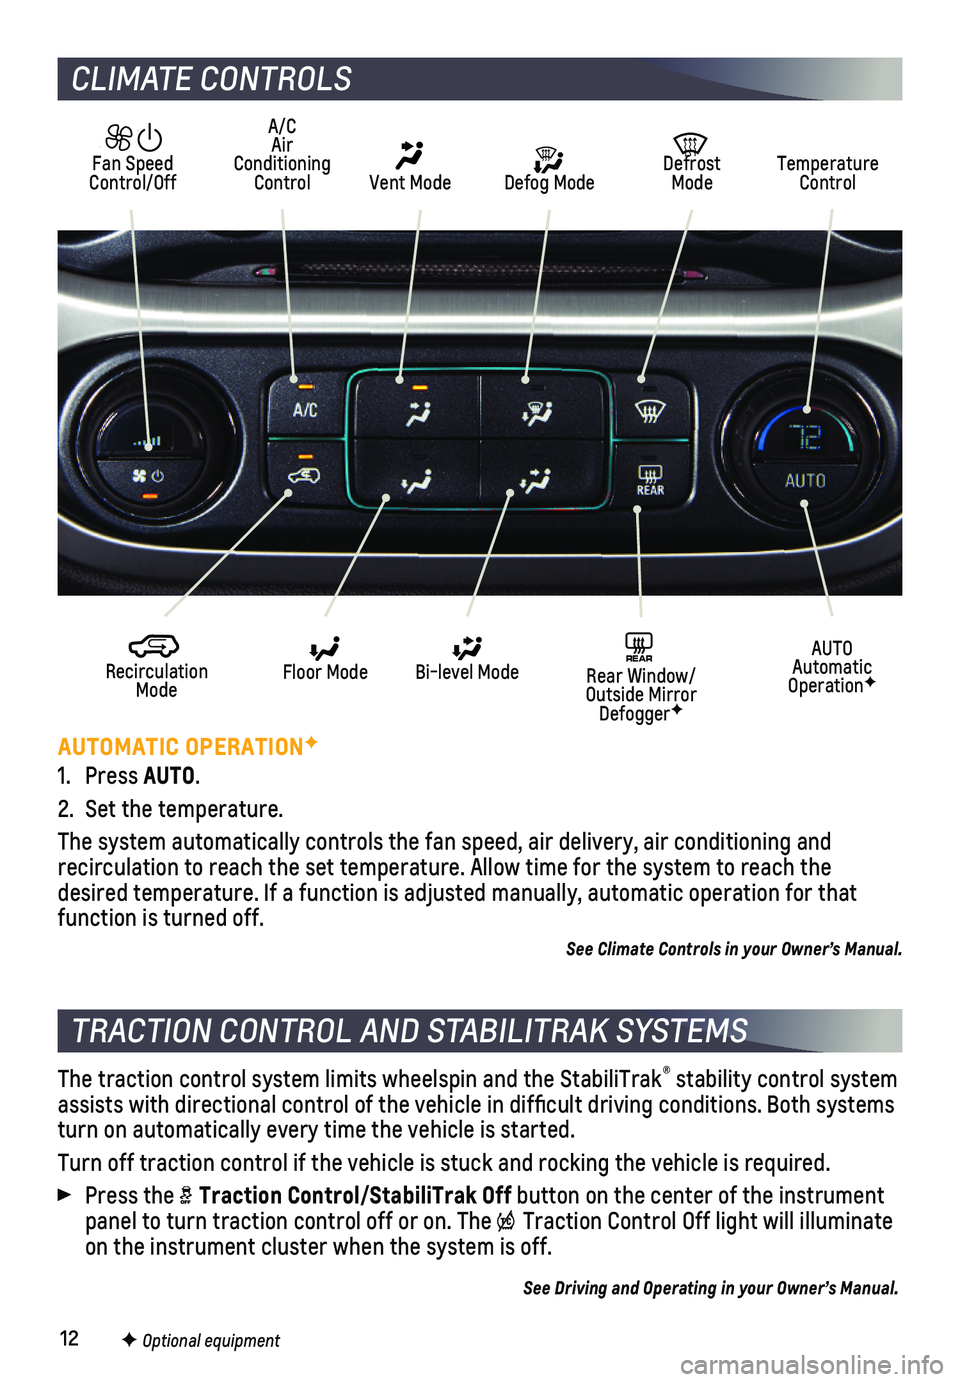 CHEVROLET COLORADO 2020  Get To Know Guide 12
CLIMATE CONTROLS
AUTOMATIC OPERATIONF
1. Press AUTO.
2. Set the temperature. 
The system automatically controls the fan speed, air delivery, air condi\
tioning and  
recirculation to reach the set 